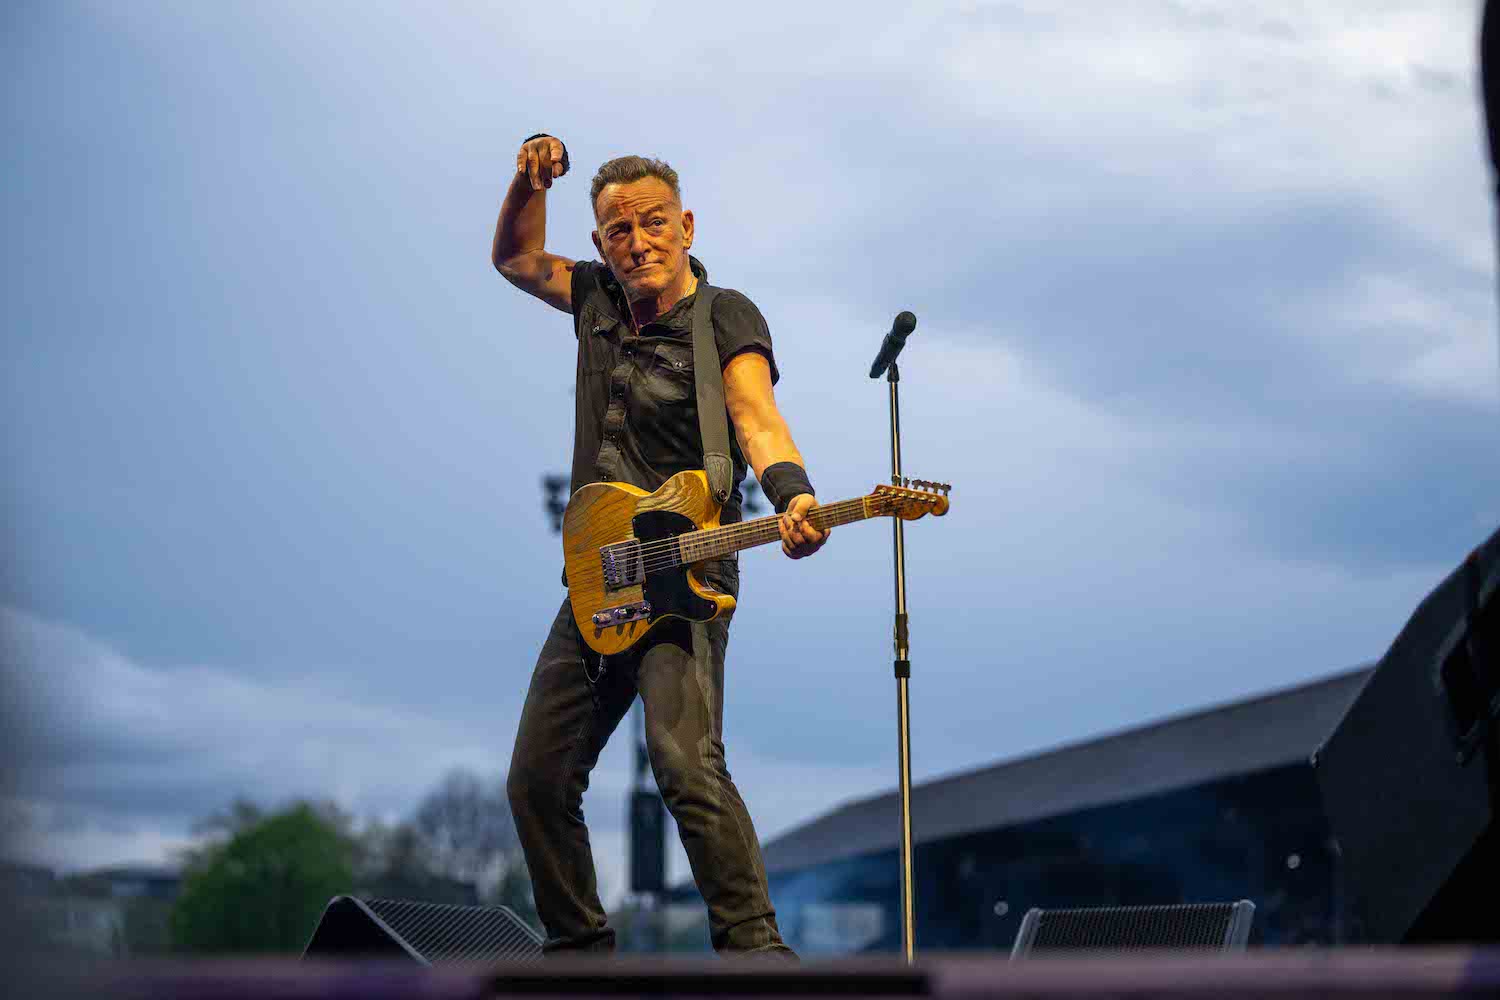 Bruce Springsteen & E Street Band at RDS Arena, Dublin, Ireland on May 7, 2023.